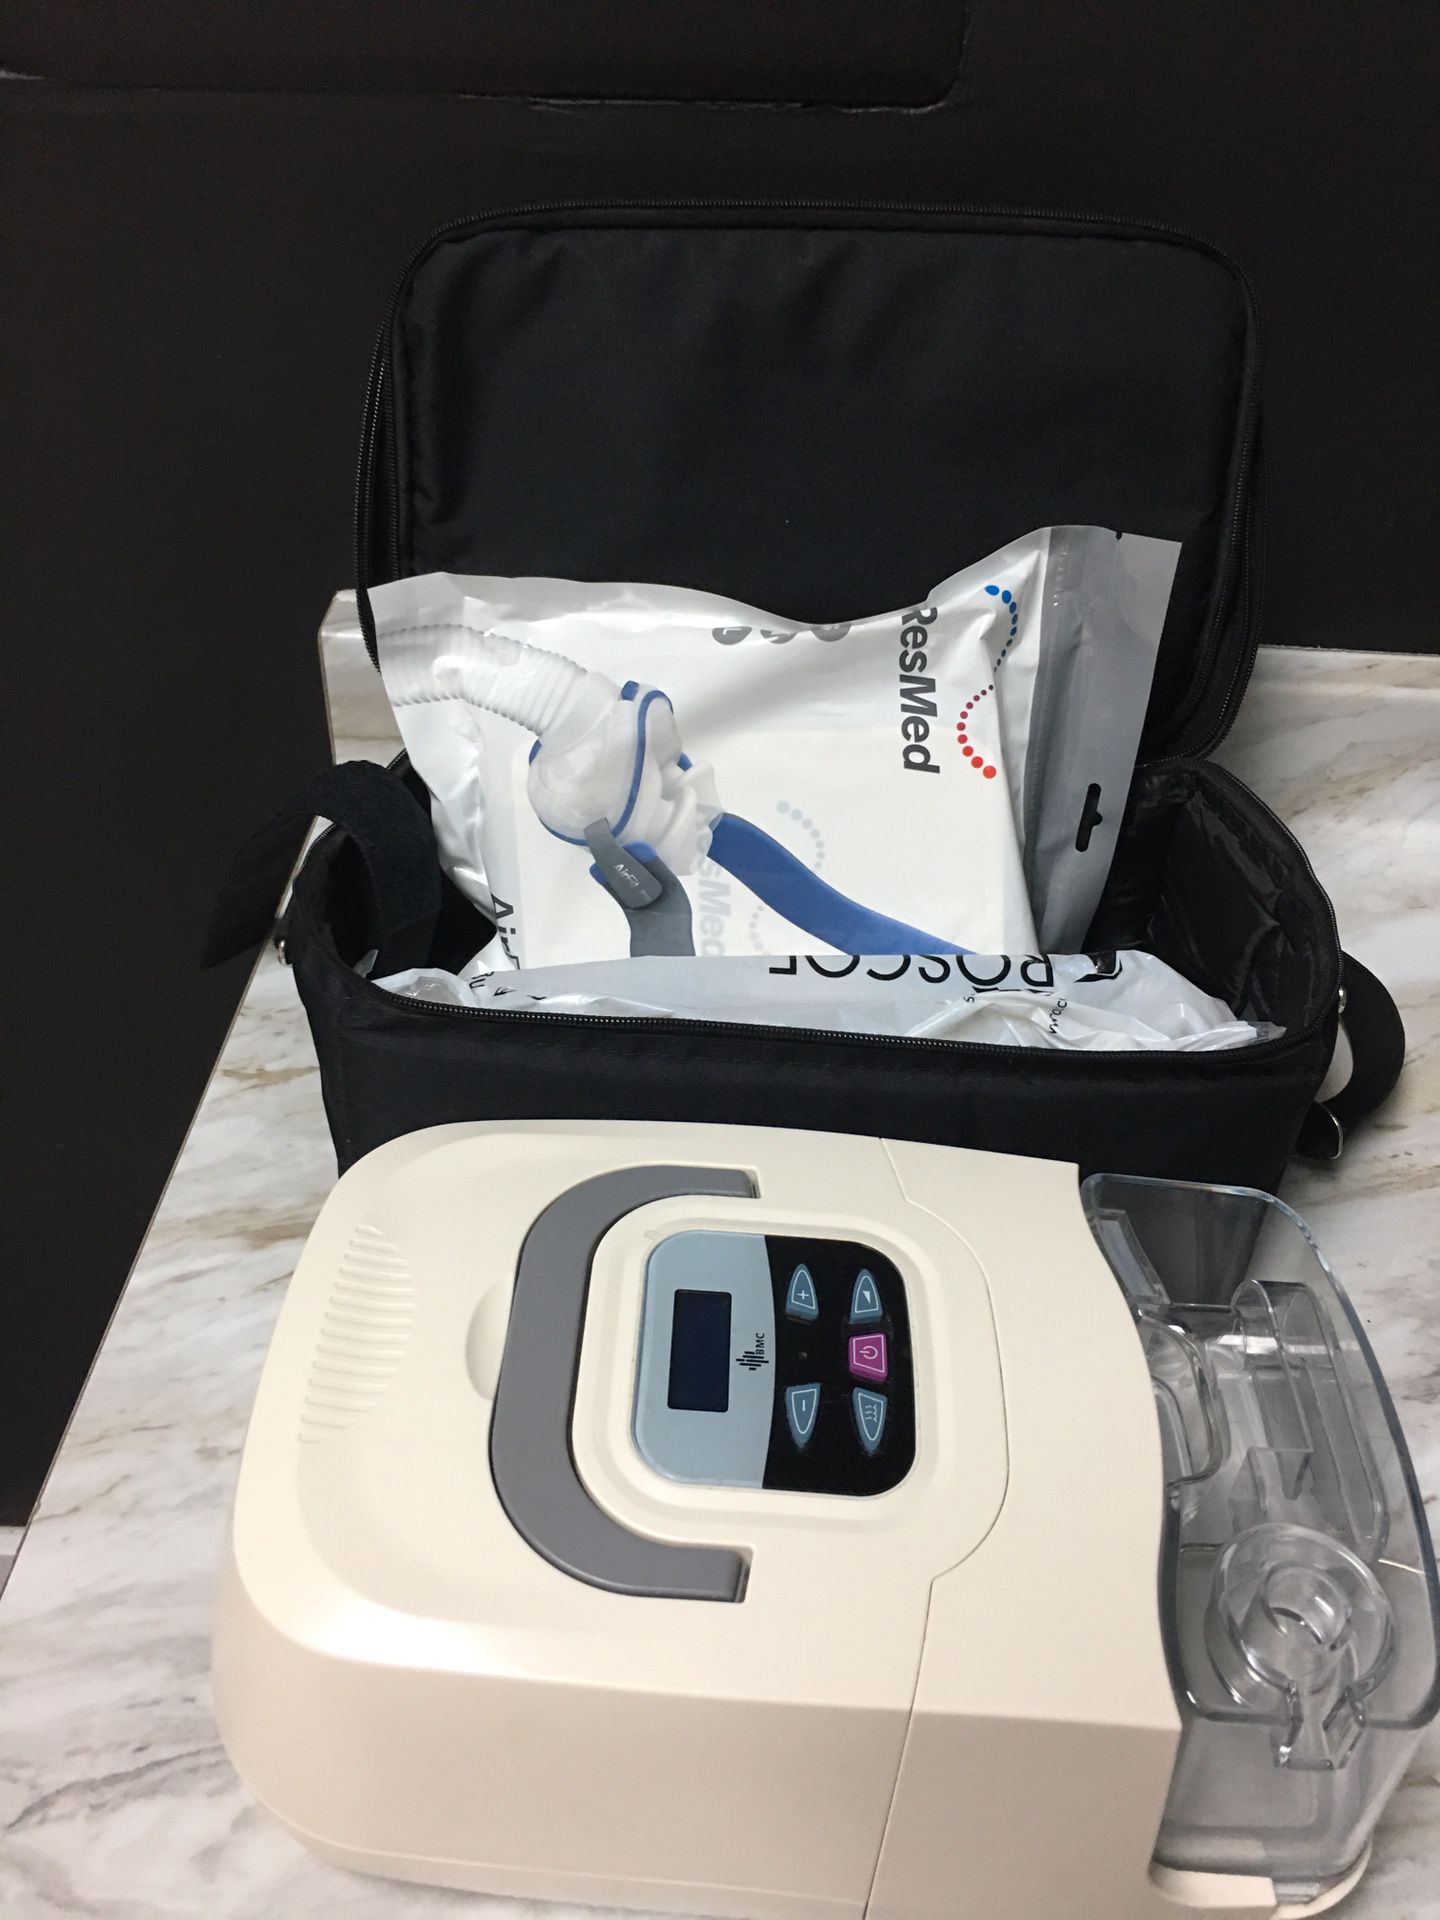 Restmart Cpap machine with resmed airfit nasal pillow